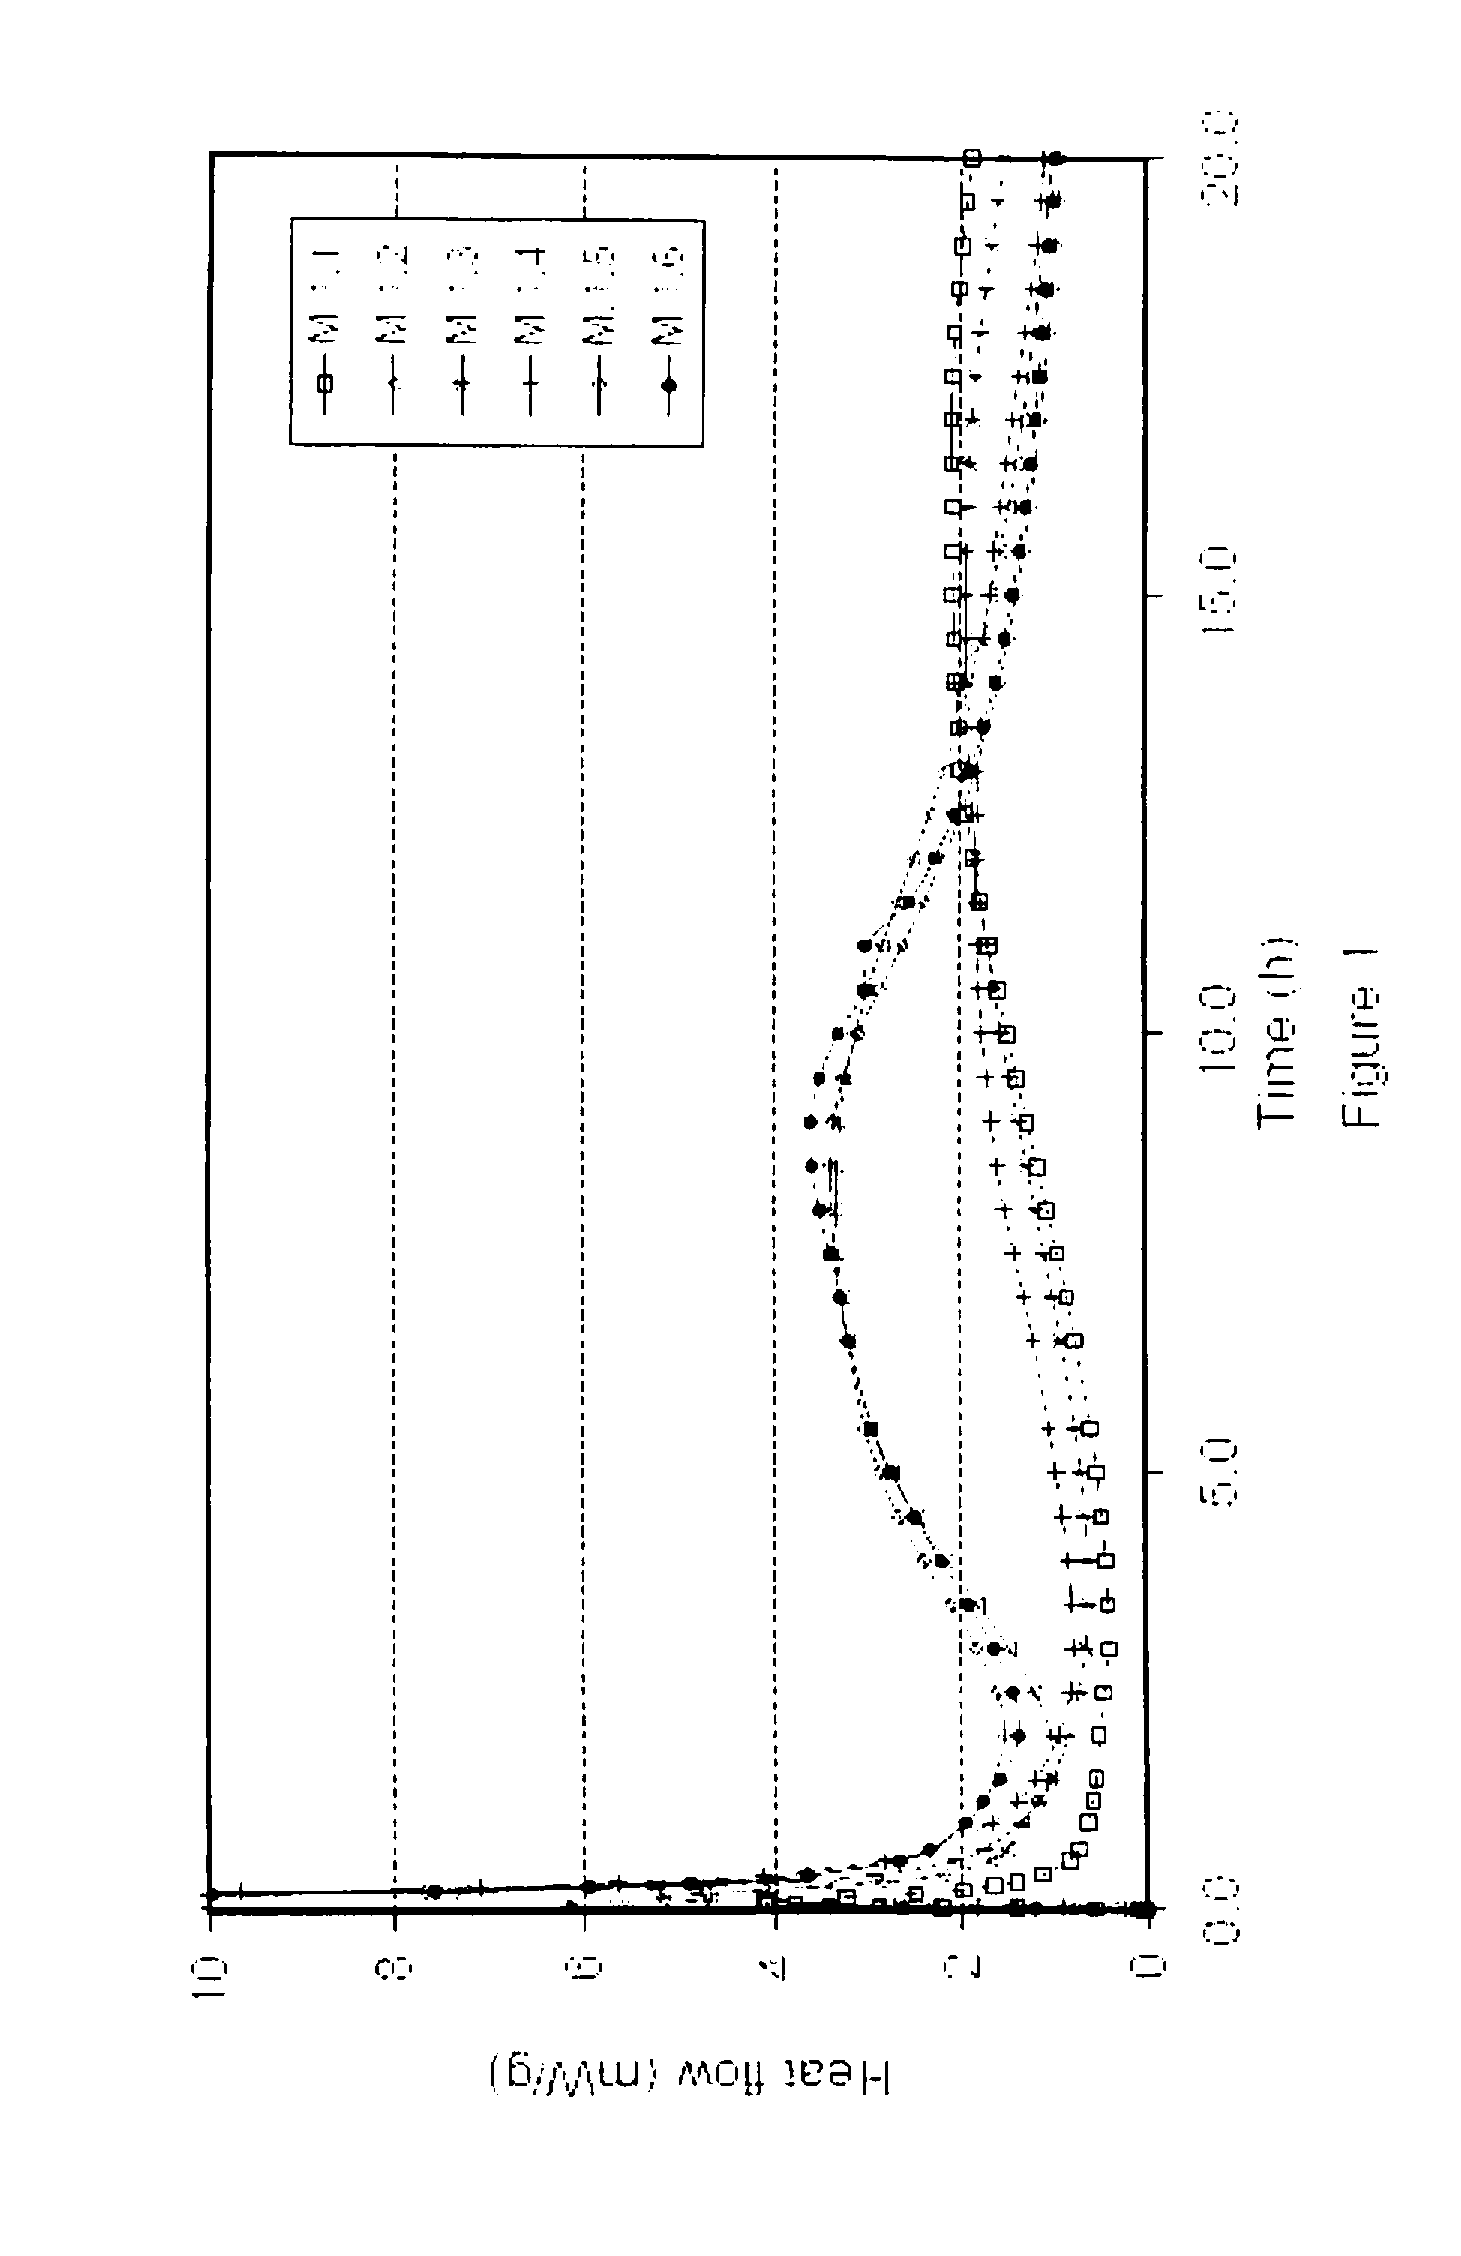 Sprayable Hydraulic Binder Composition And Method Of Use